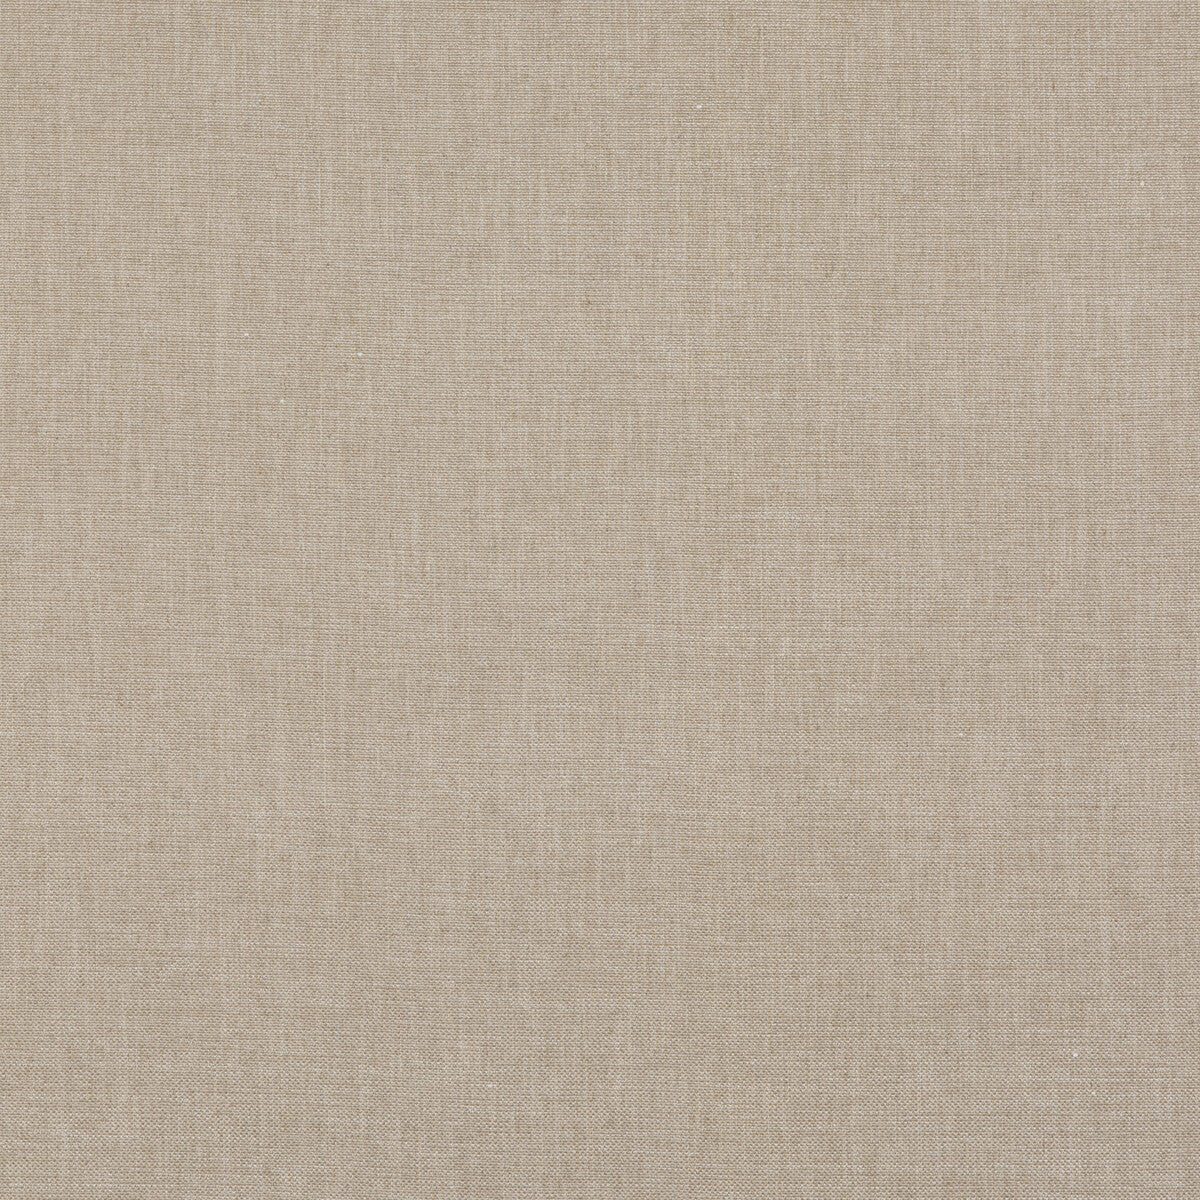 Darwen fabric in linen color - pattern BF10957.110.0 - by G P &amp; J Baker in the Baker House Textures collection